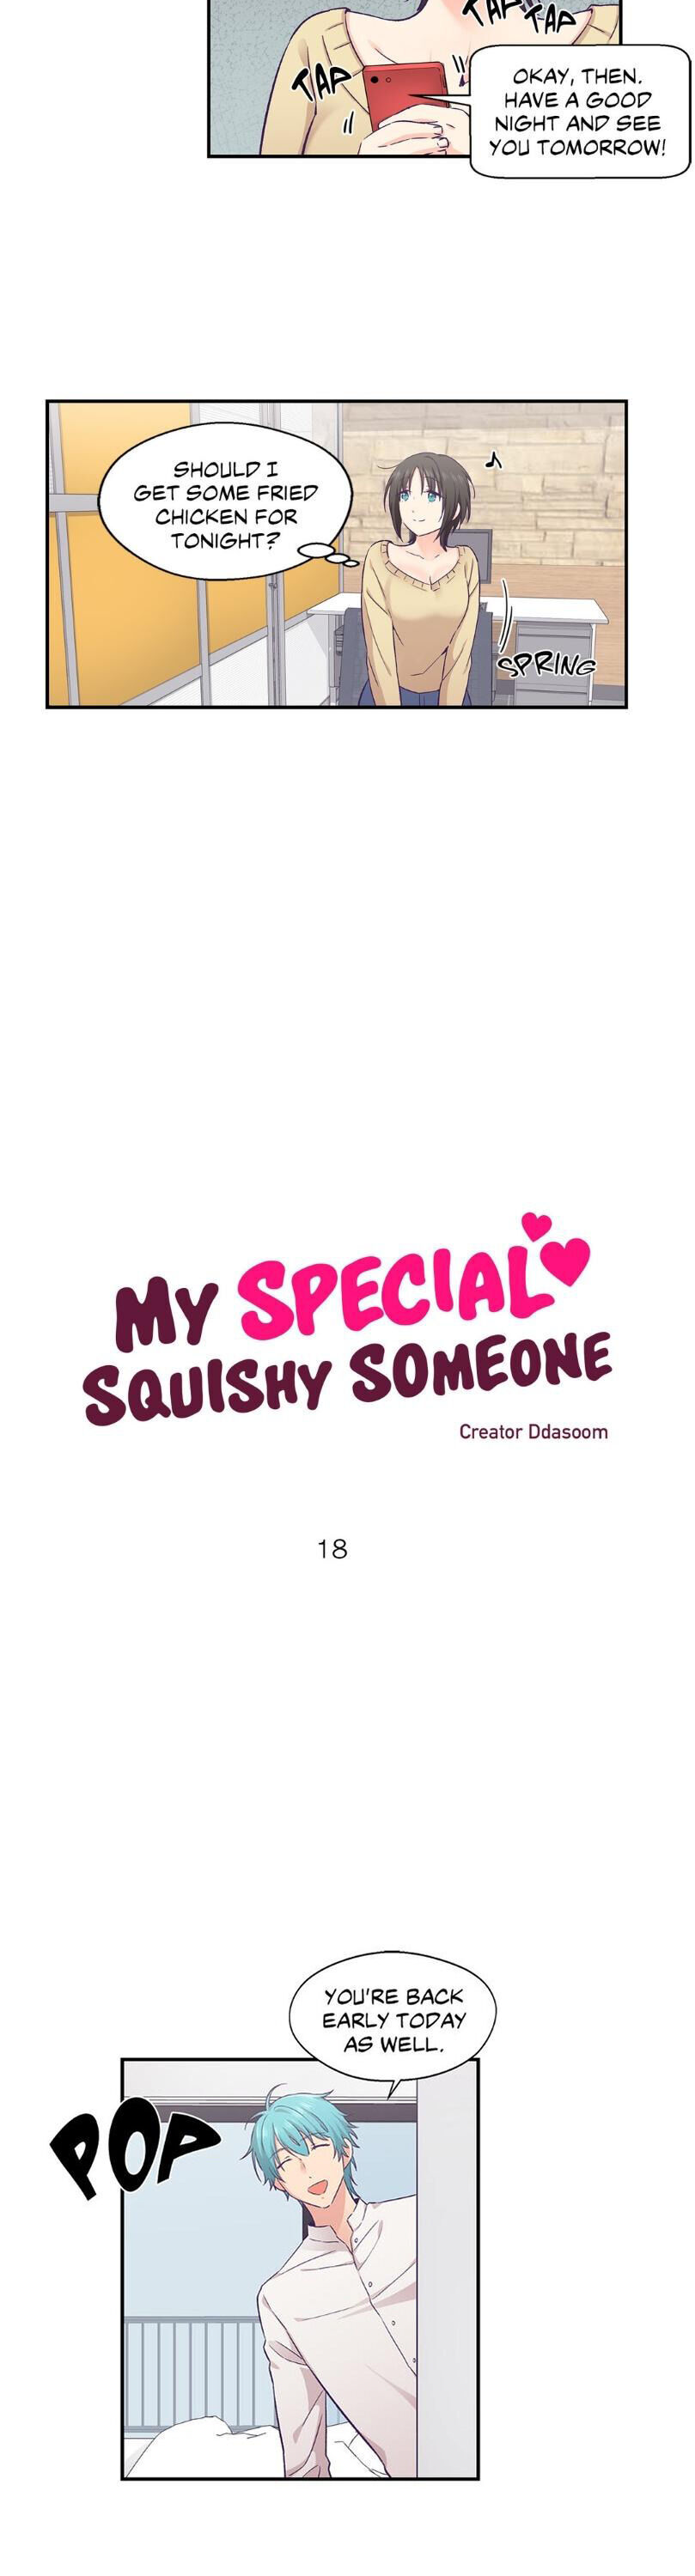 My Special Squishy Someone - Page 2